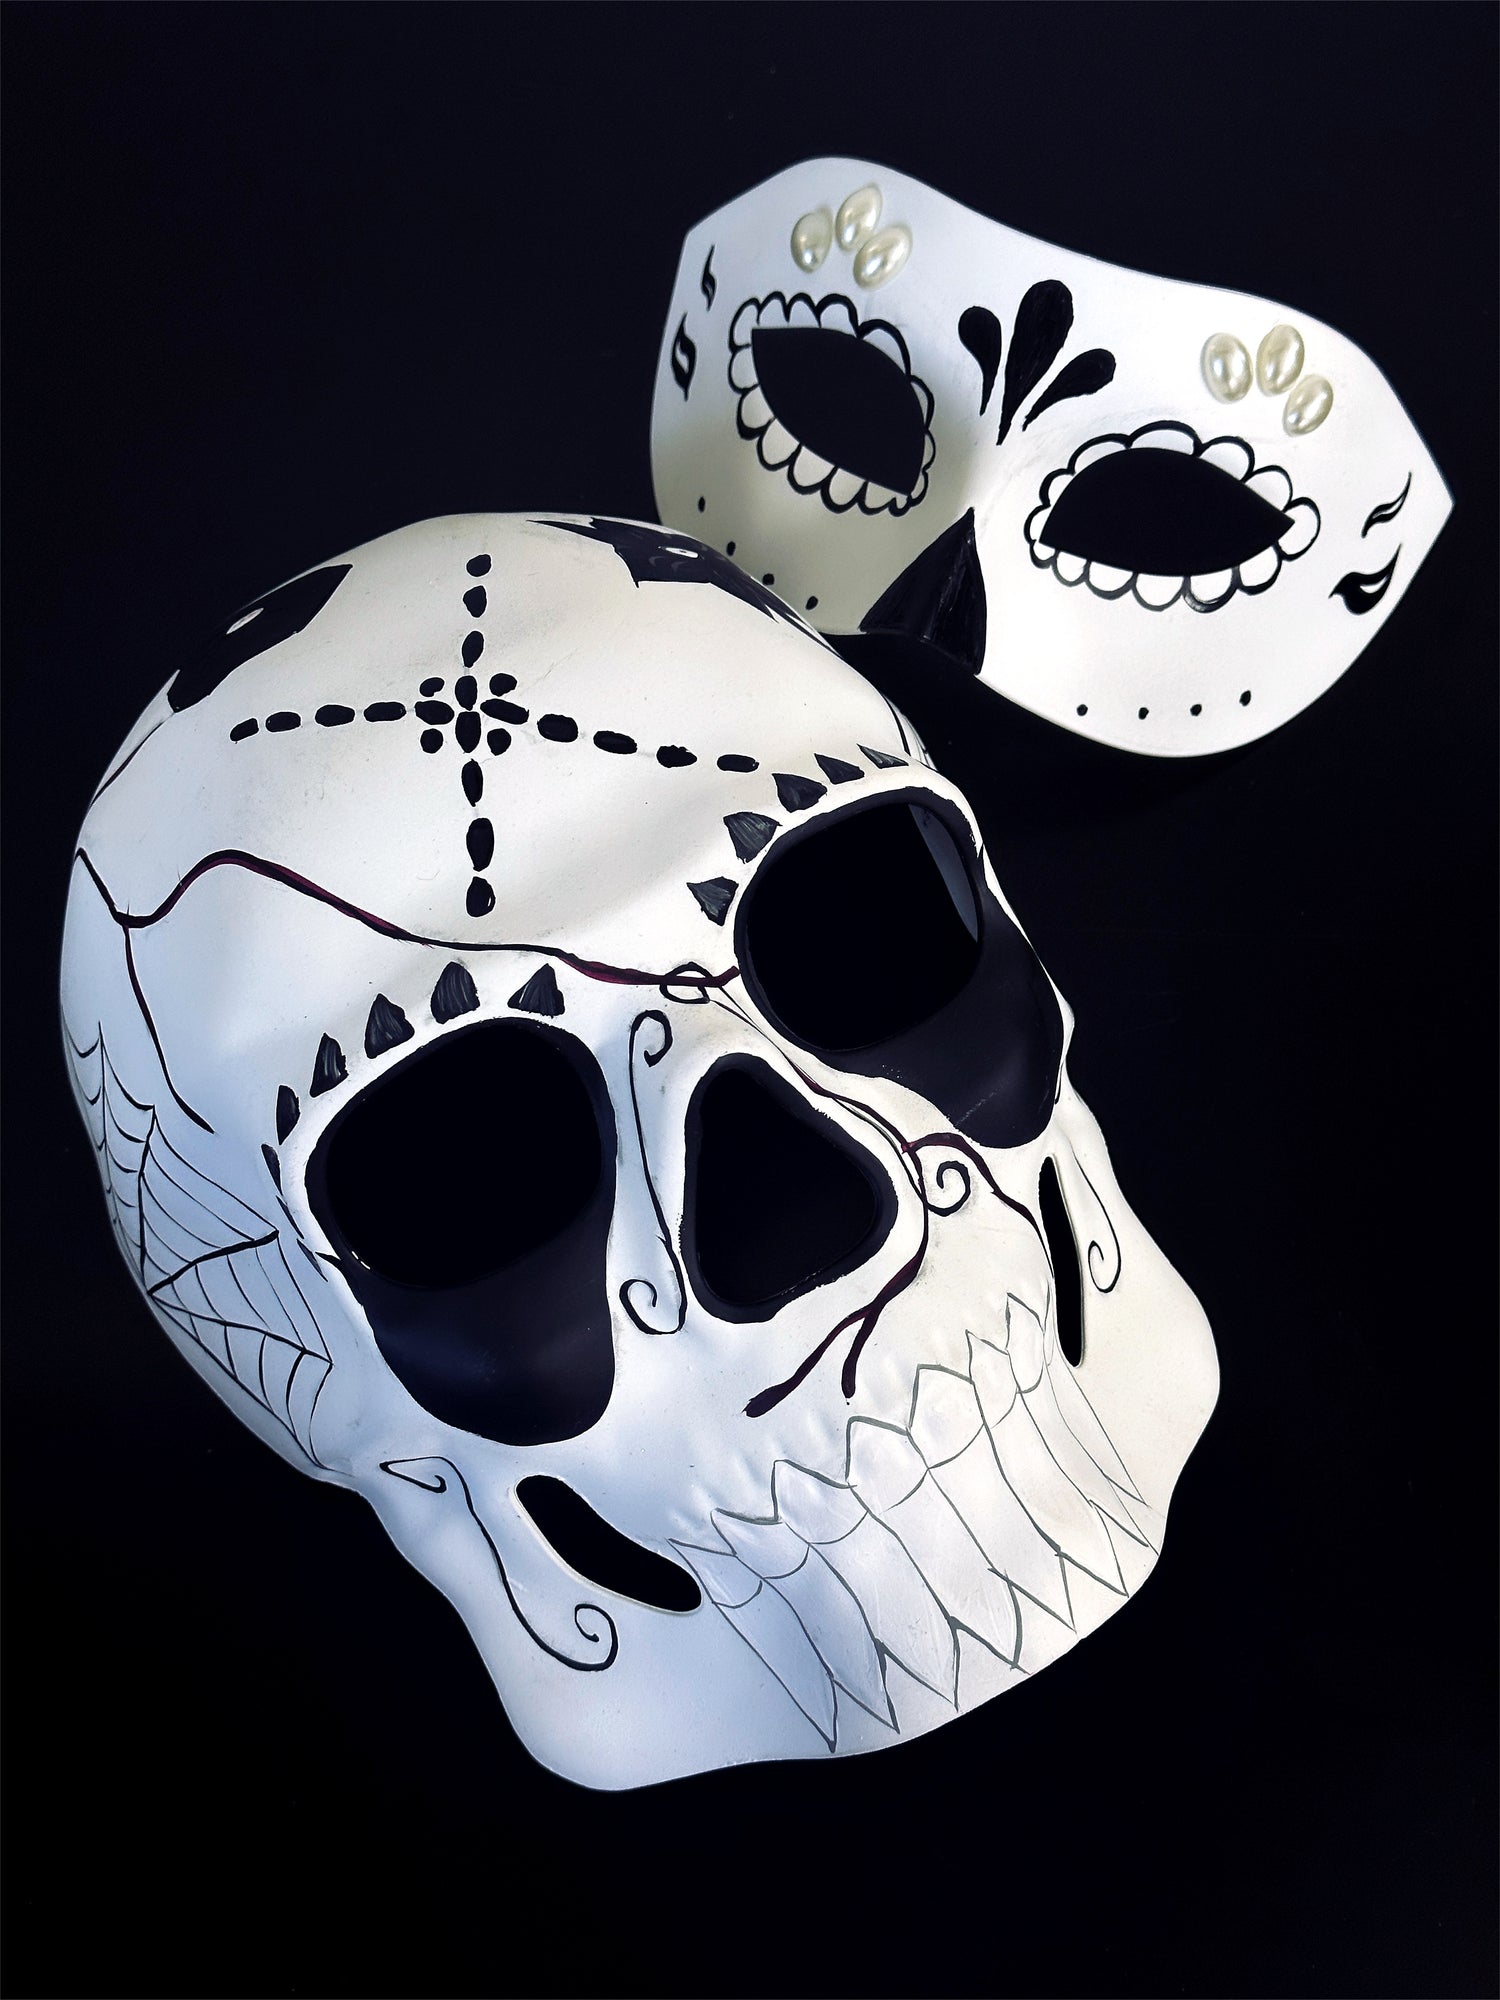 Couples day of the dead masquerade masks in black and white.